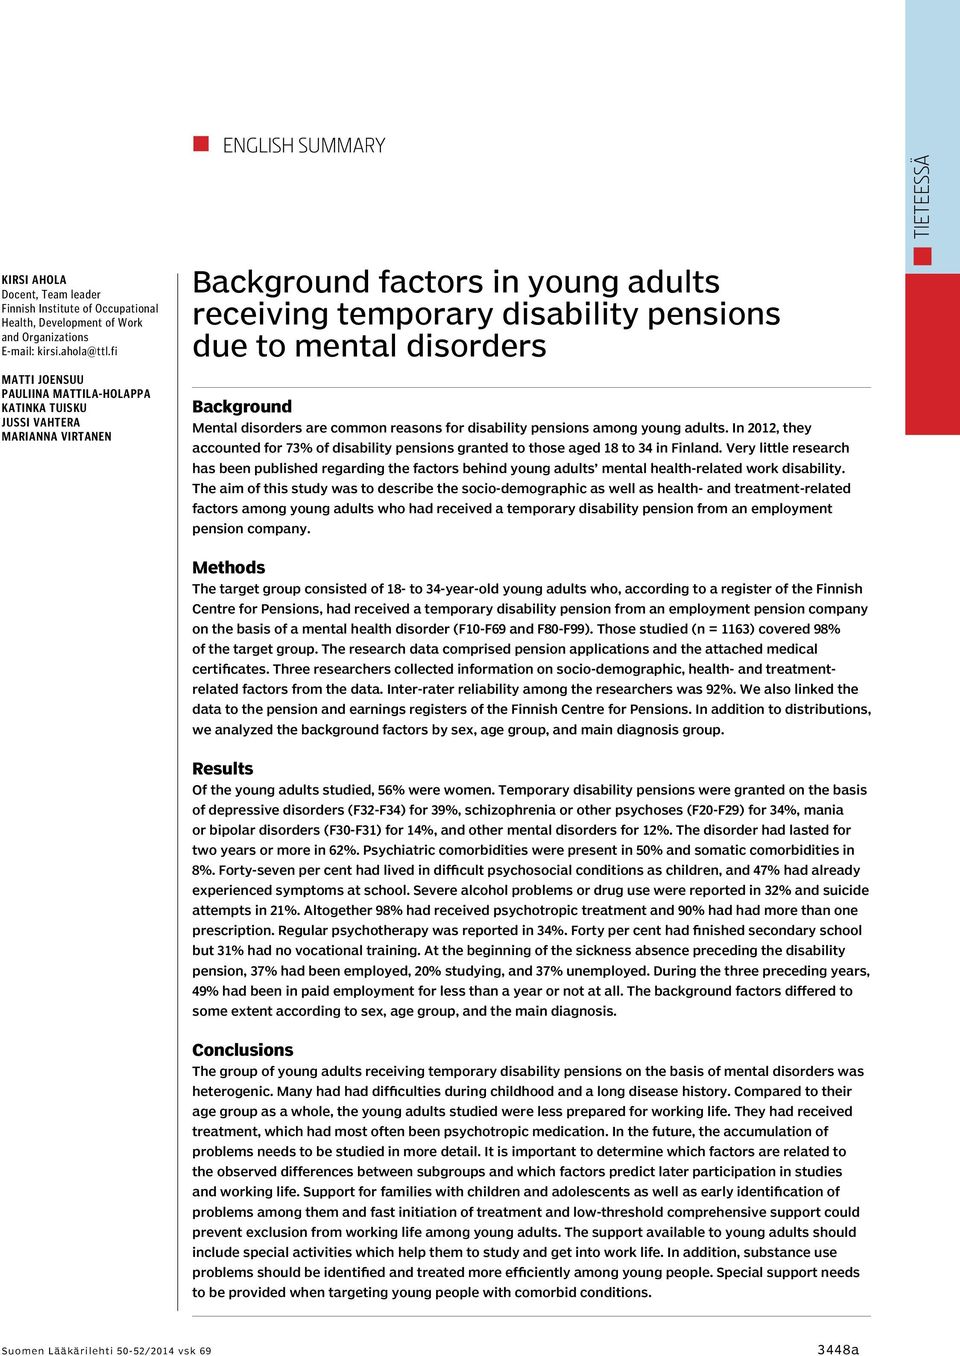 Mental disorders are common reasons for disability pensions among young adults. In 2012, they accounted for 73% of disability pensions granted to those aged 18 to 34 in Finland.